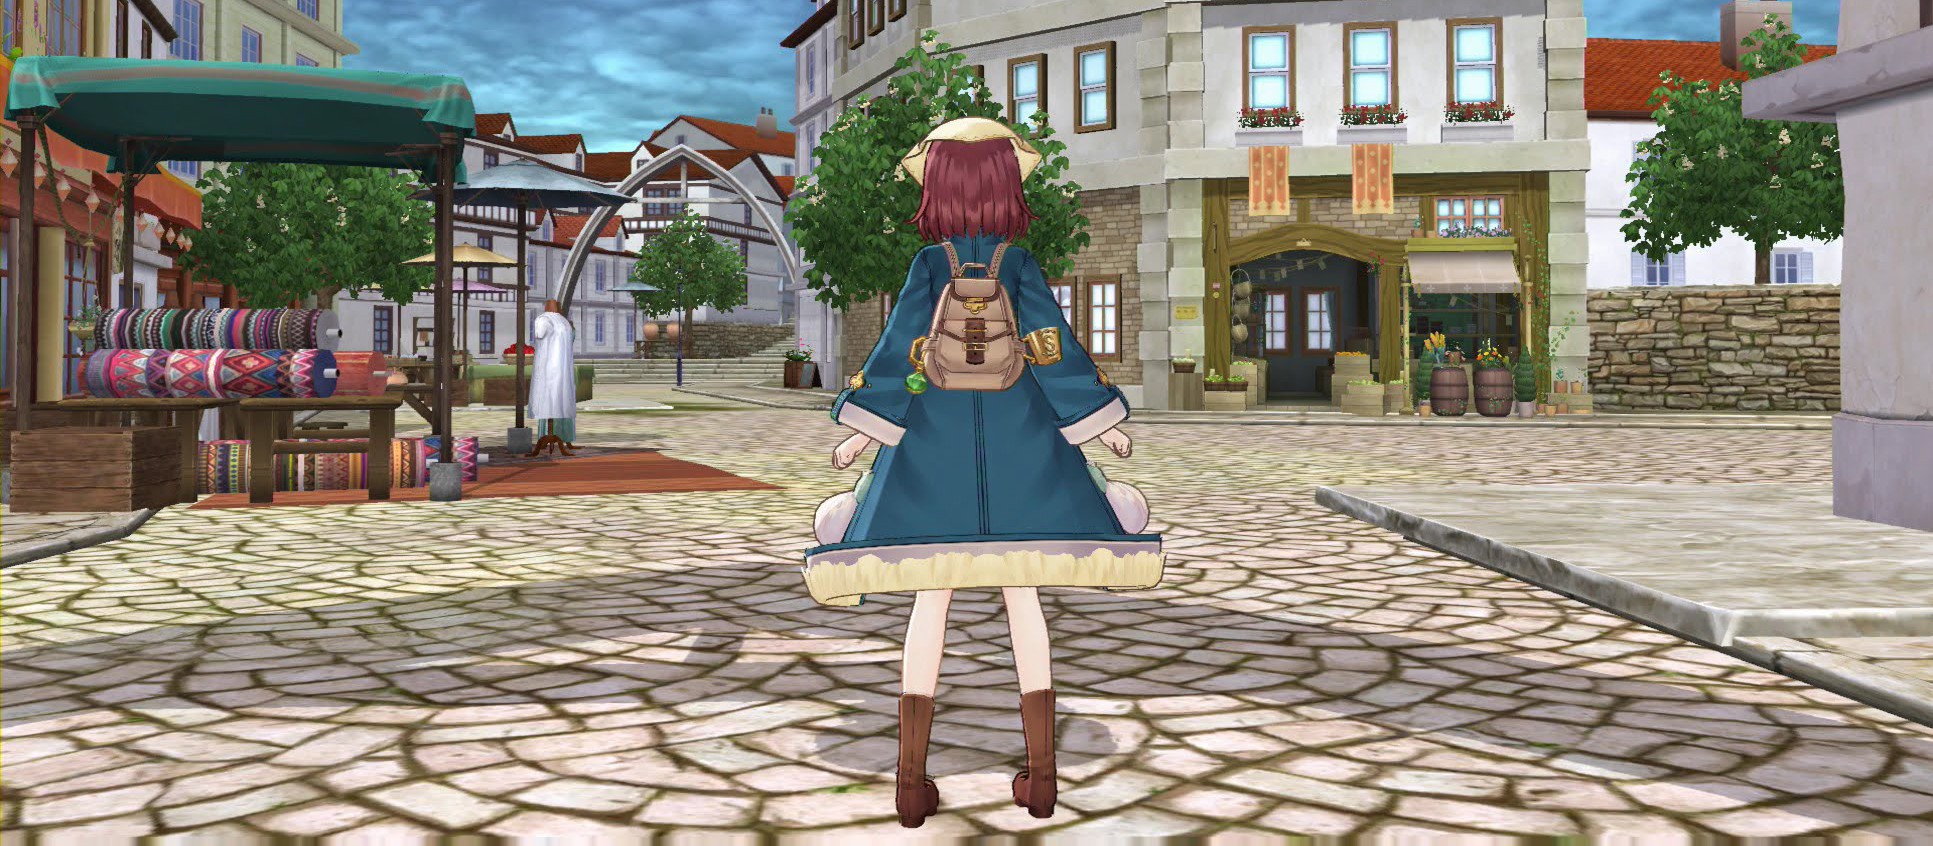 Atelier Sophie : The Alchemist of the Mysterious Book